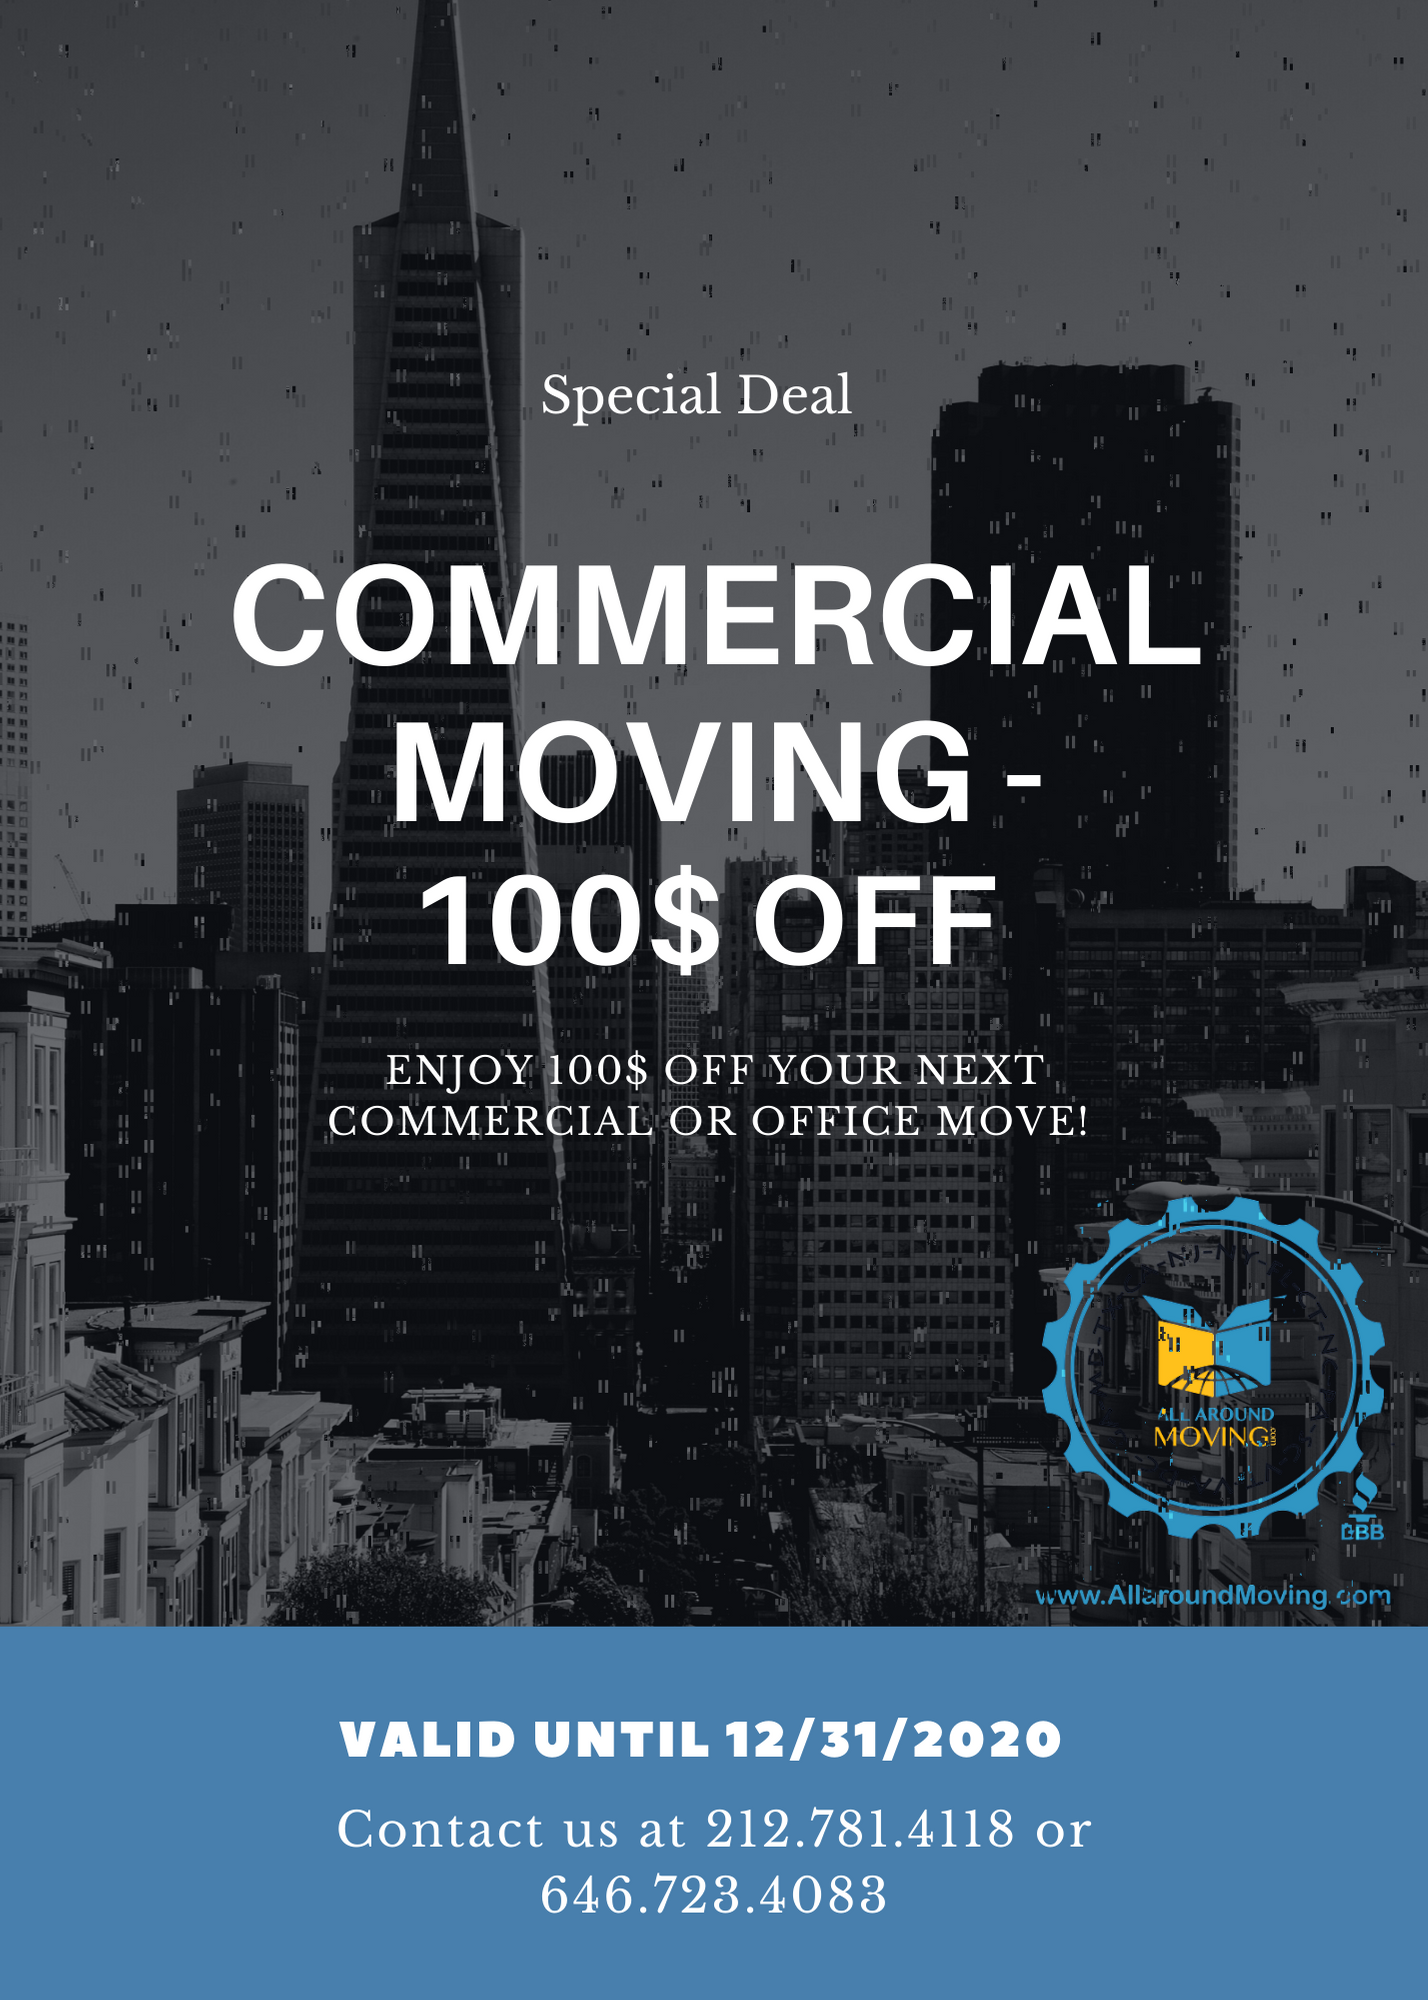 Need Commercial Moving Coupons? Book a Moving Company now! Contact us today to check out our deals! Tel. 212.781.4118